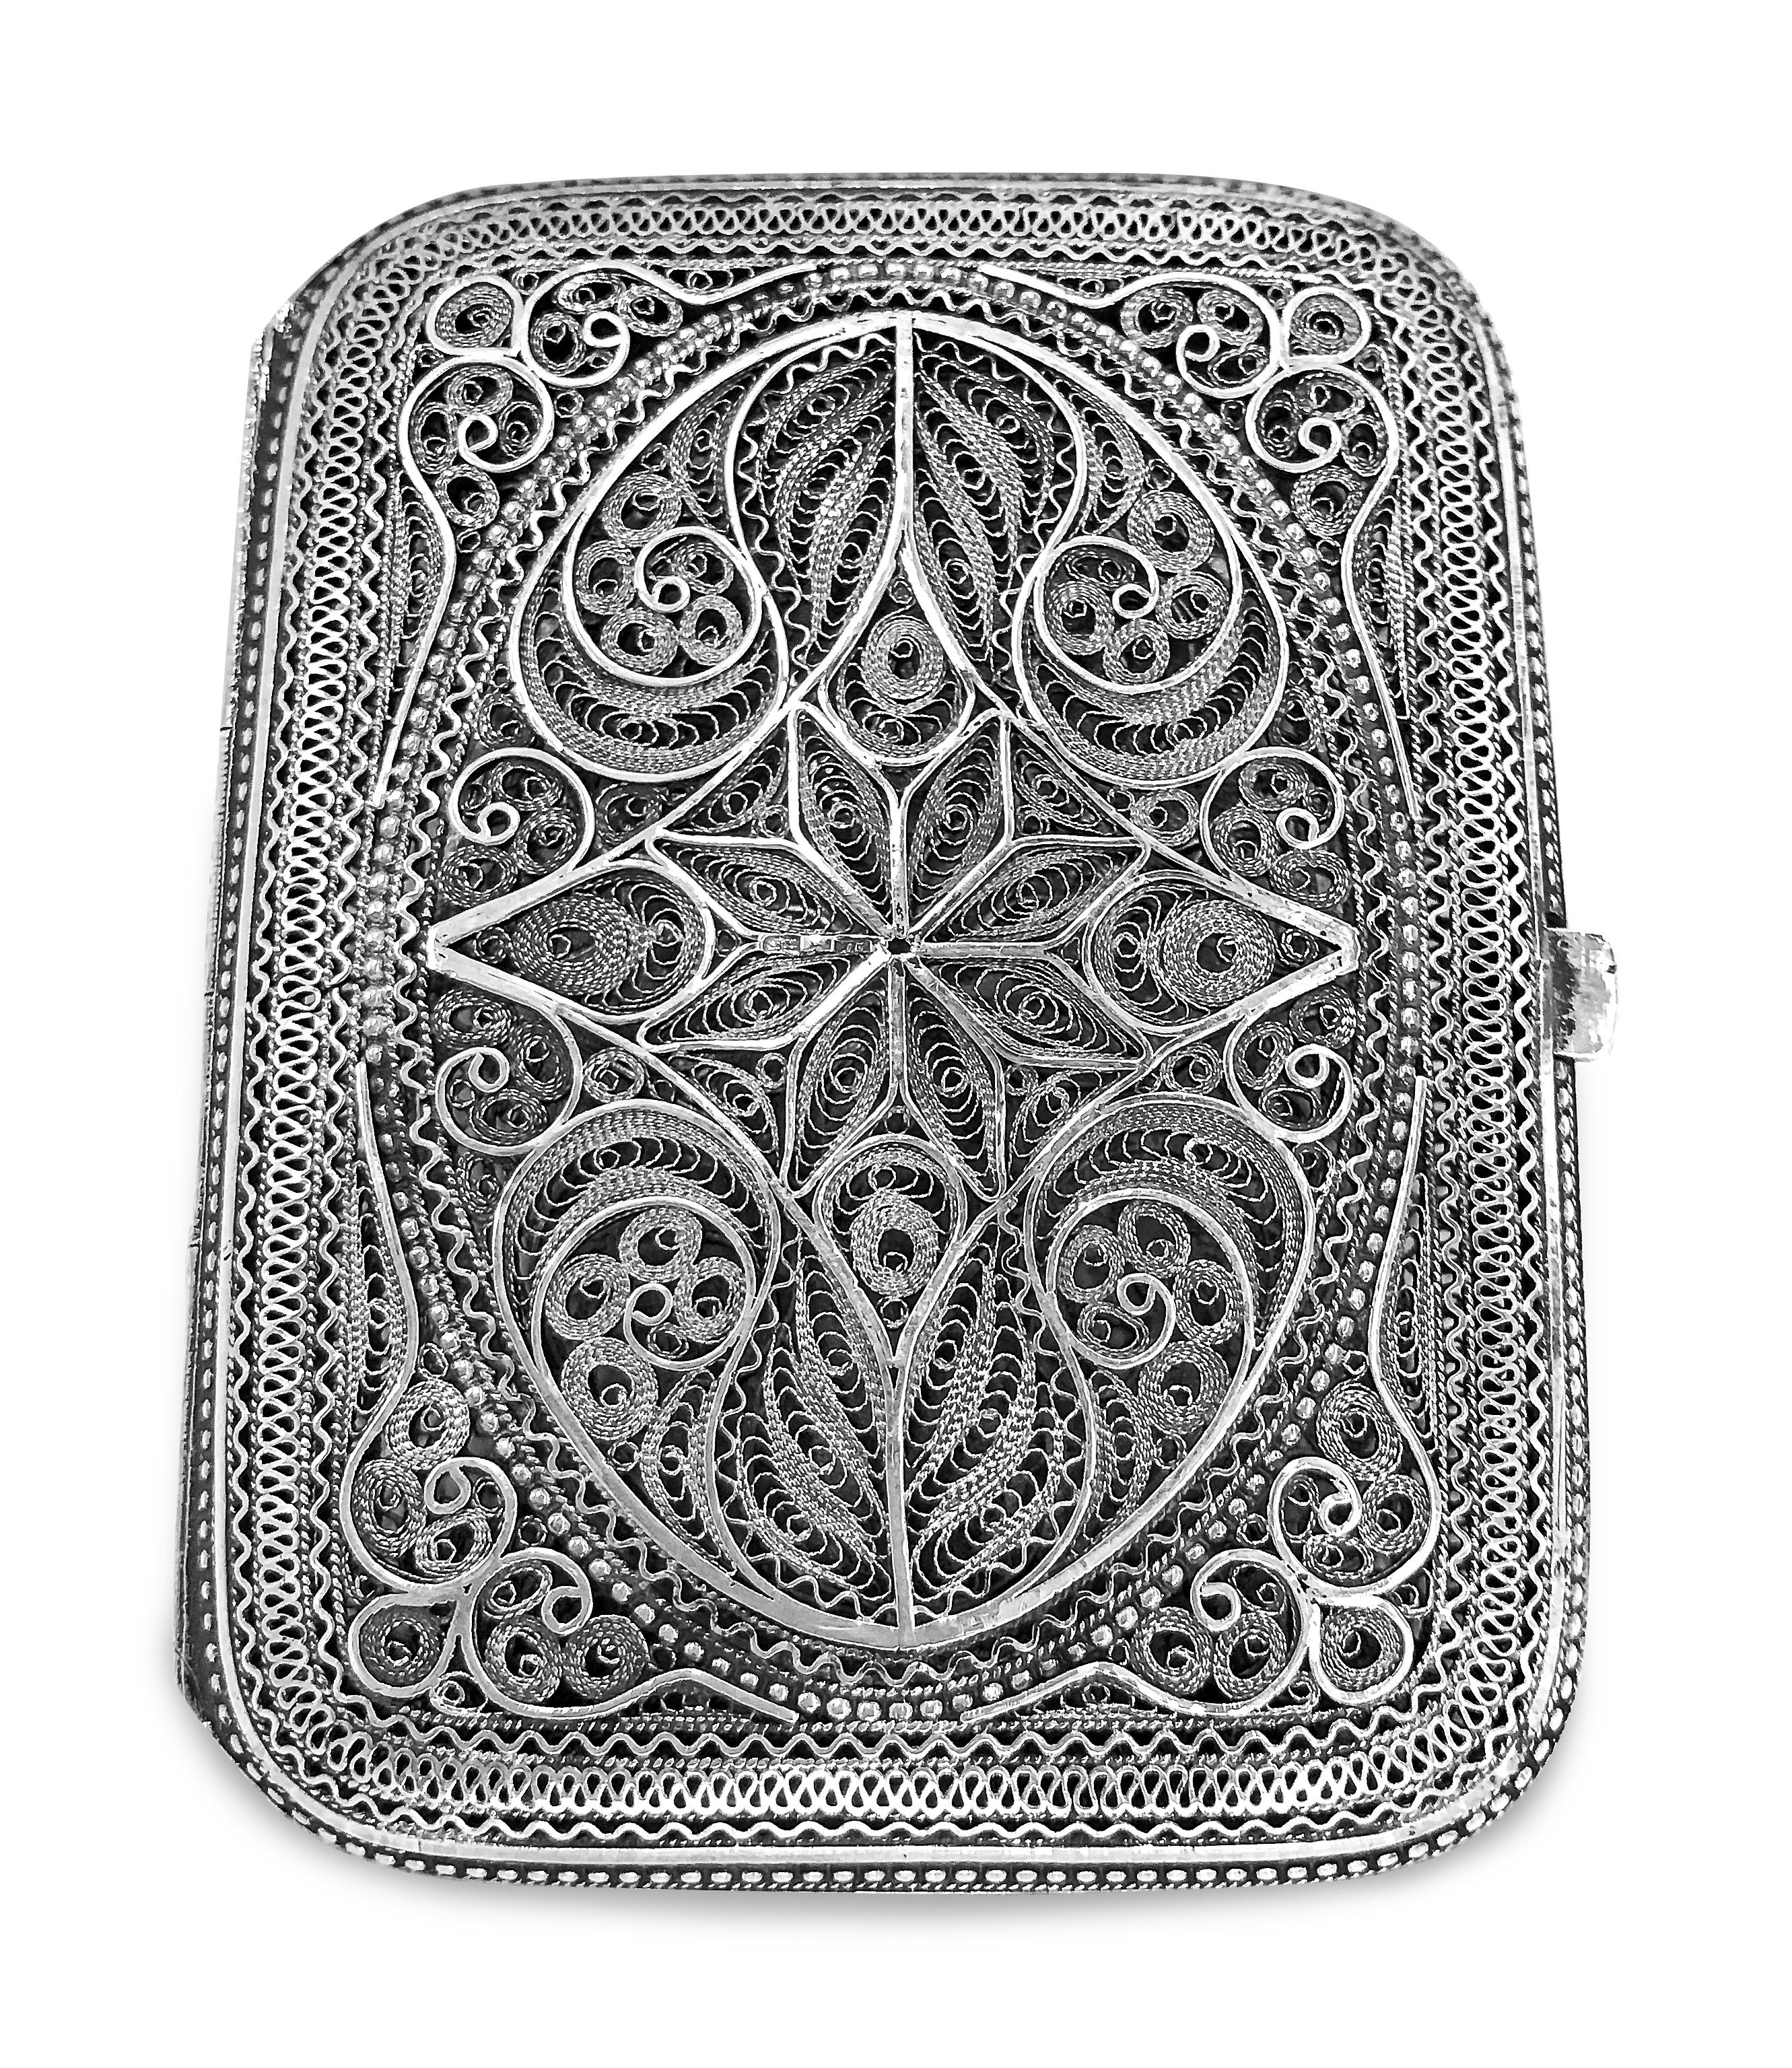 This gorgeous filigree box is all  made by hand and its 0.99 proof of sliver. The box is extremely delicate and fancy. Could be used for make up case or as cigarette box .
W : 2 3/4